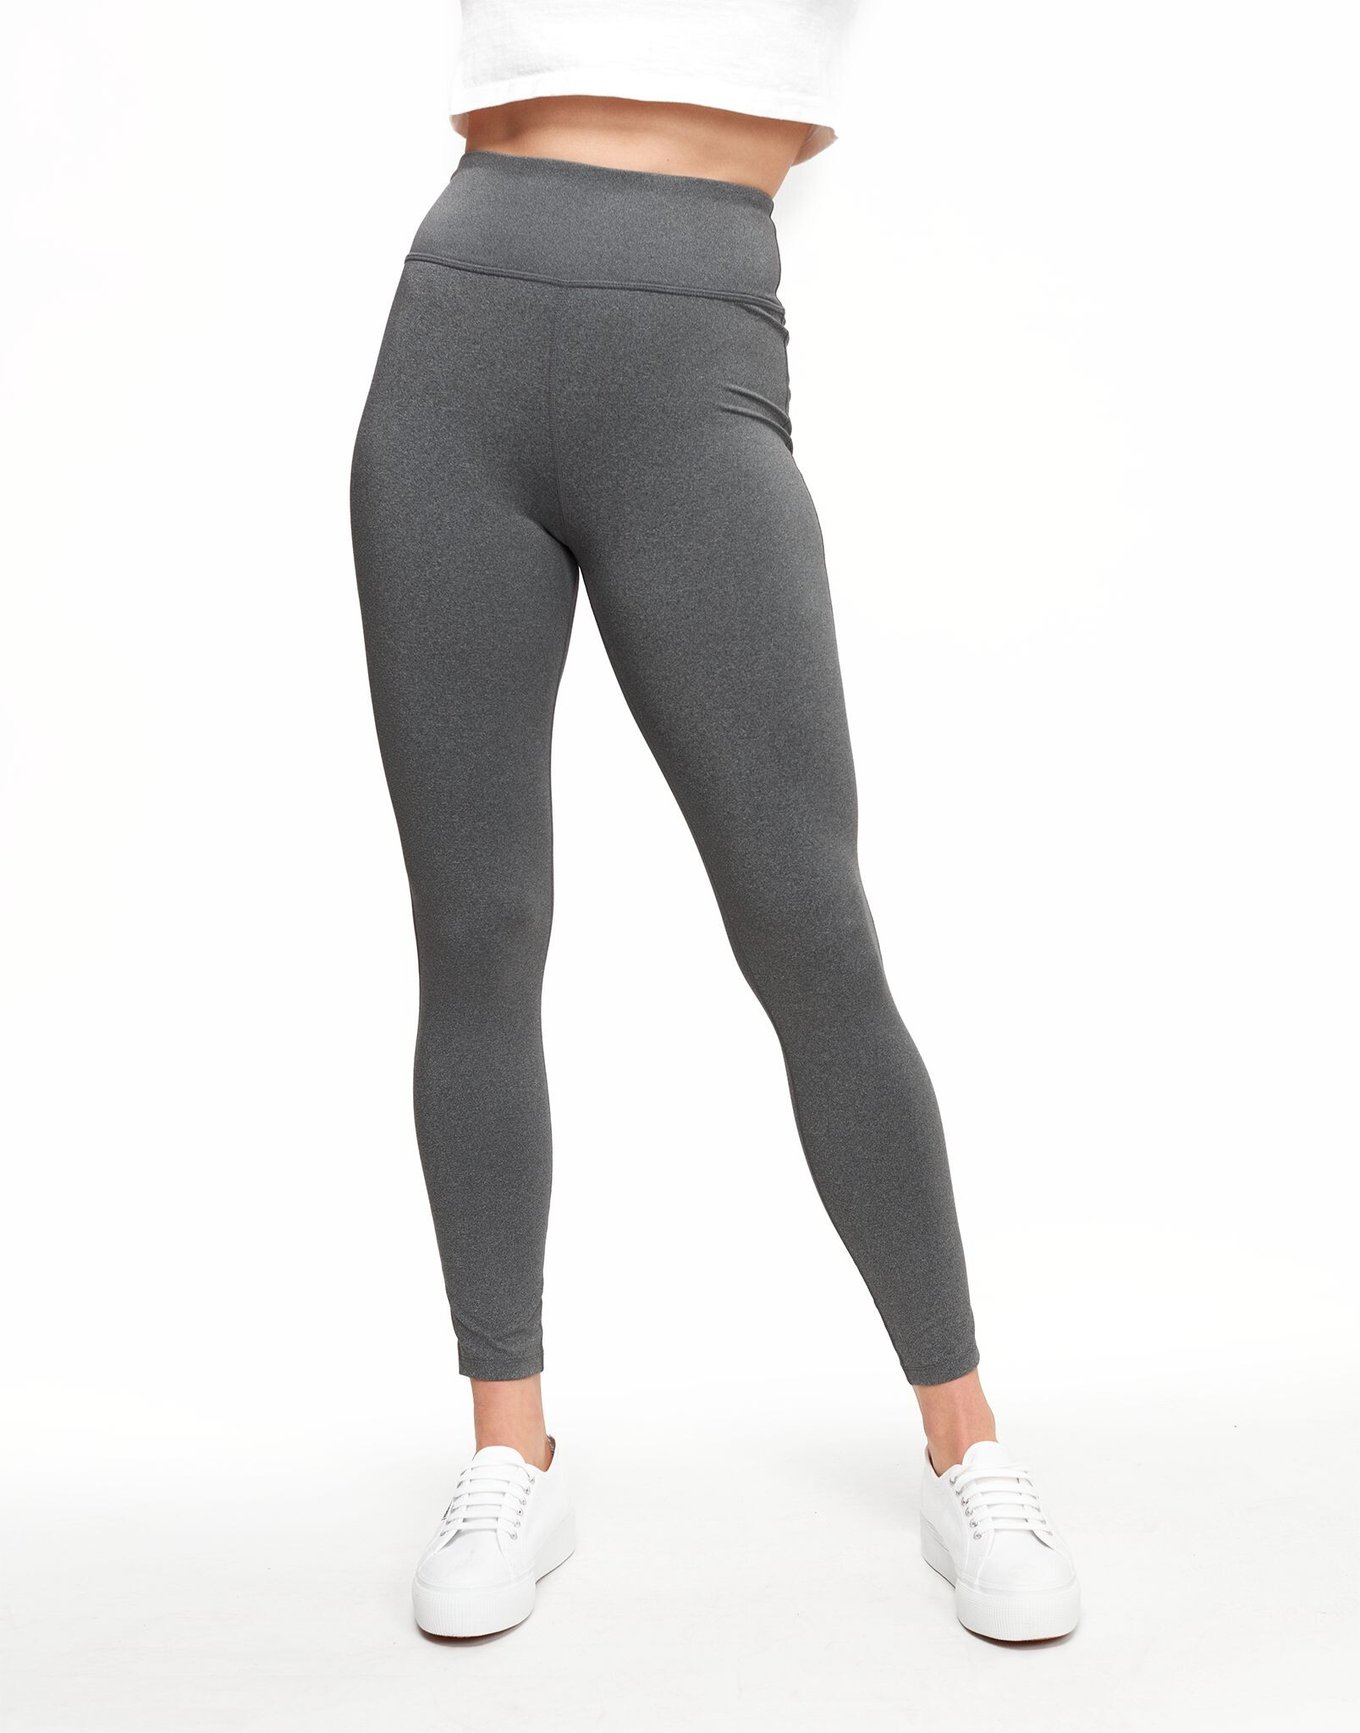 Homma Solid Gray Leggings Size XL - 63% off